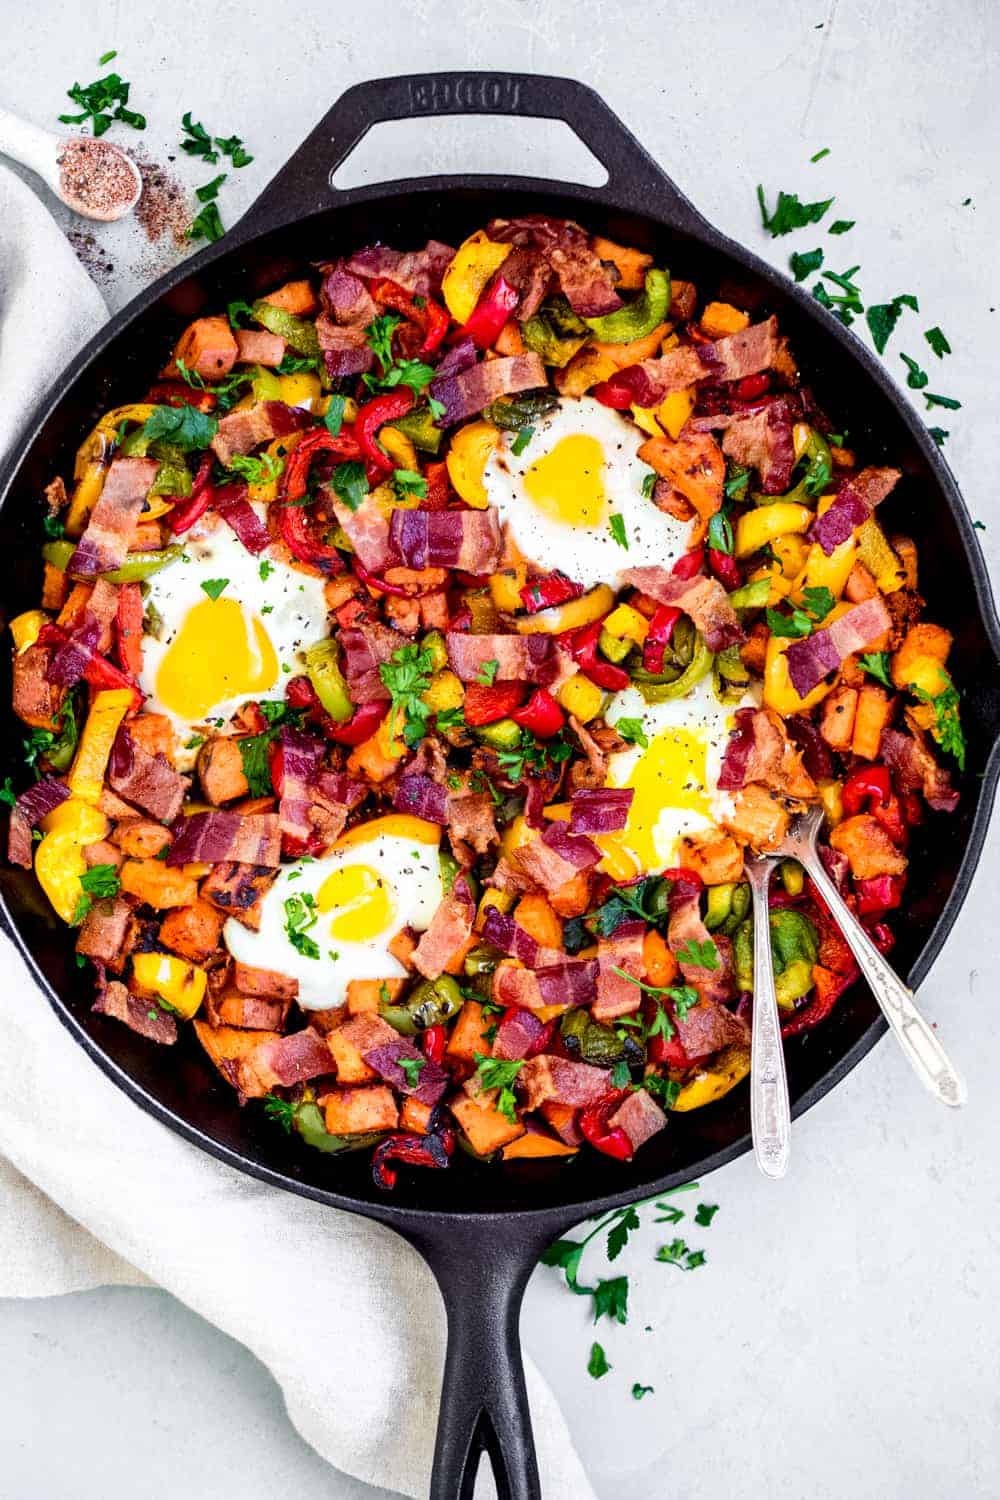 Sweet potato hash in a cast iron pan with forks, spices and herbs